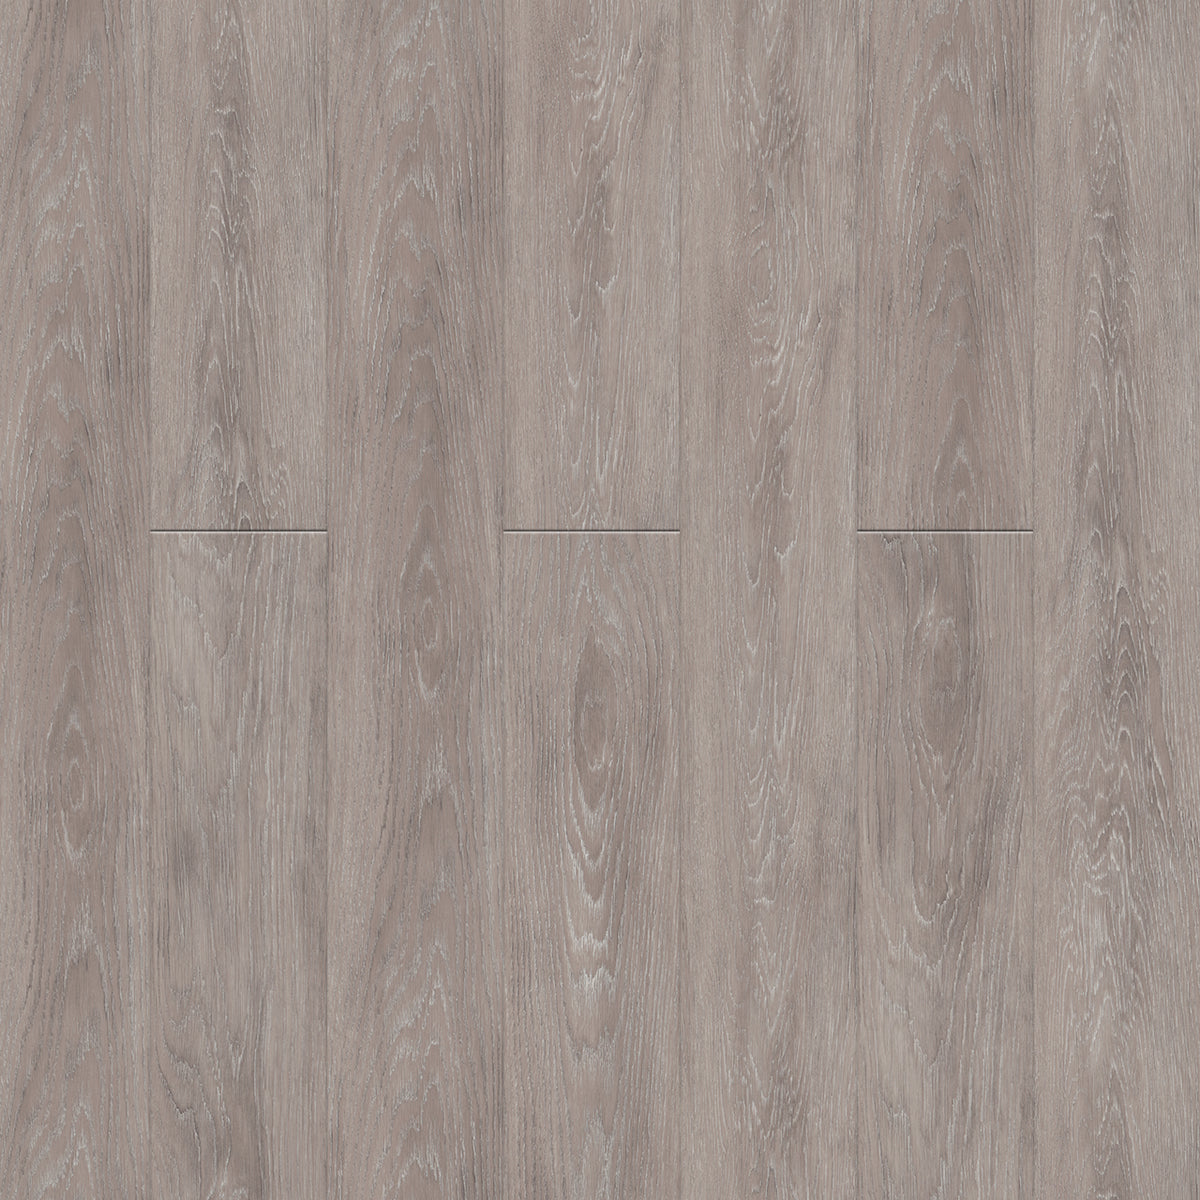 Engineered Floors - Ozark 2 Collection - 7 in. x 48 in. - Driftwood